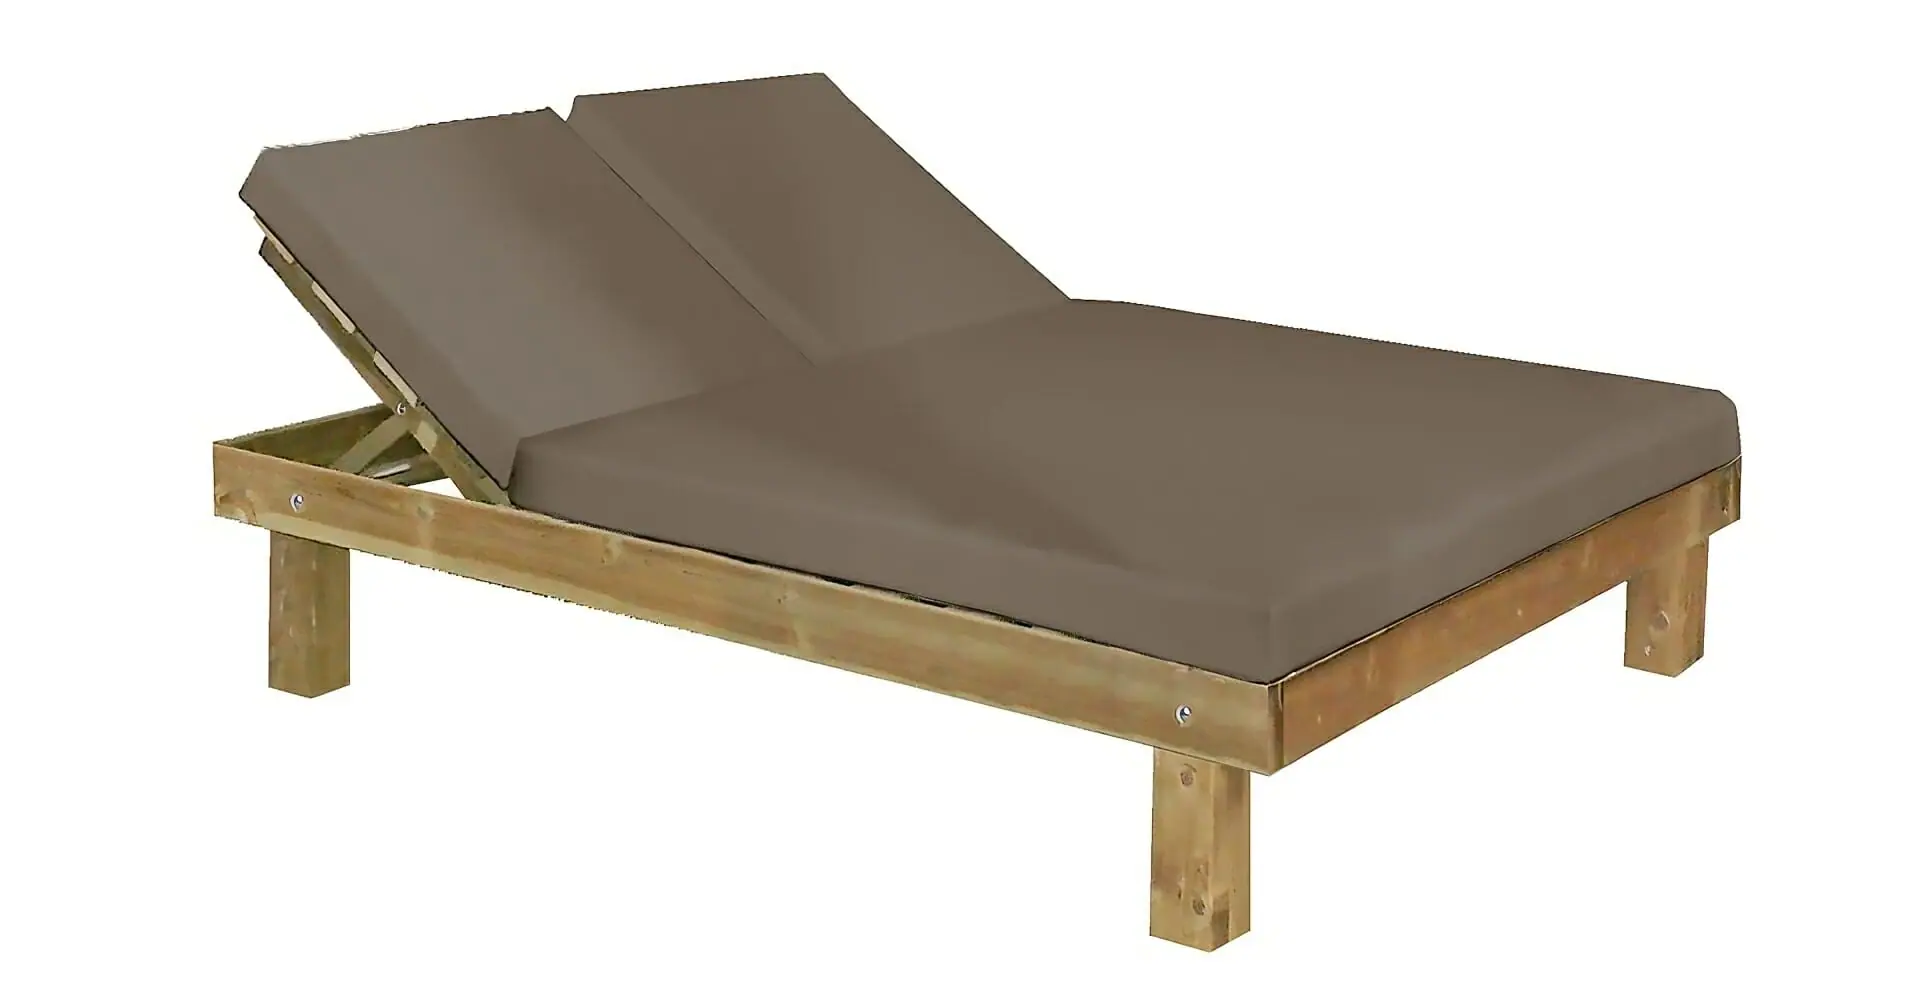 conva-madera-outdoor-double-sunbed-wooden-collection-3